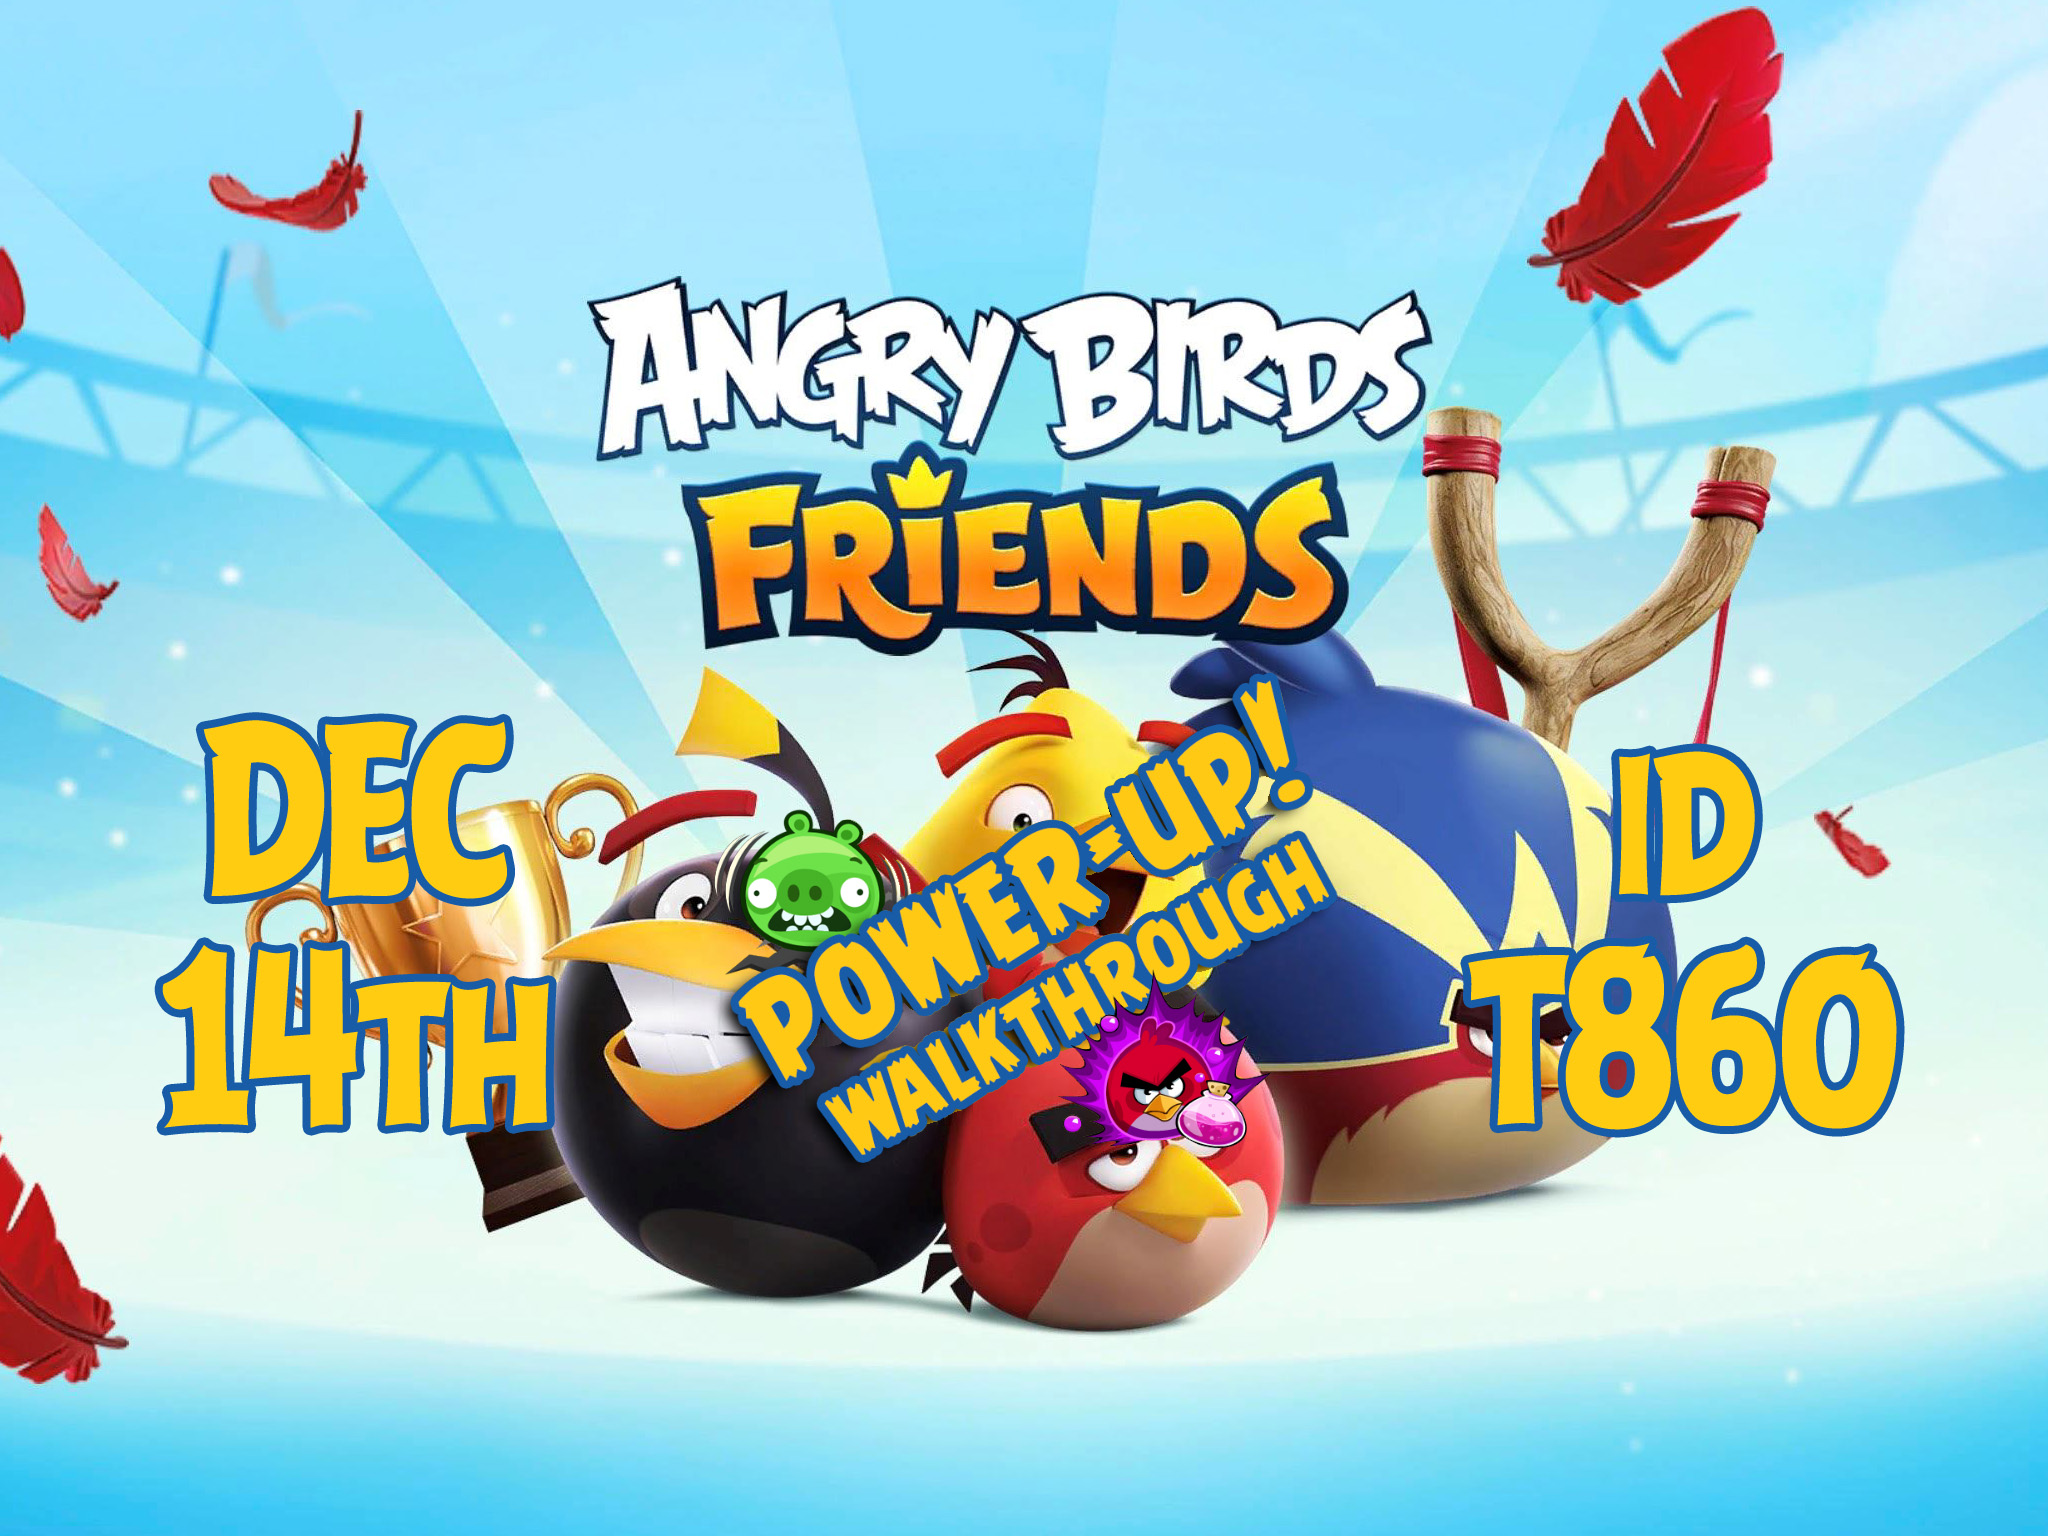 Angry-Birds-Friends-Tournament-T860-Feature-Image-PU